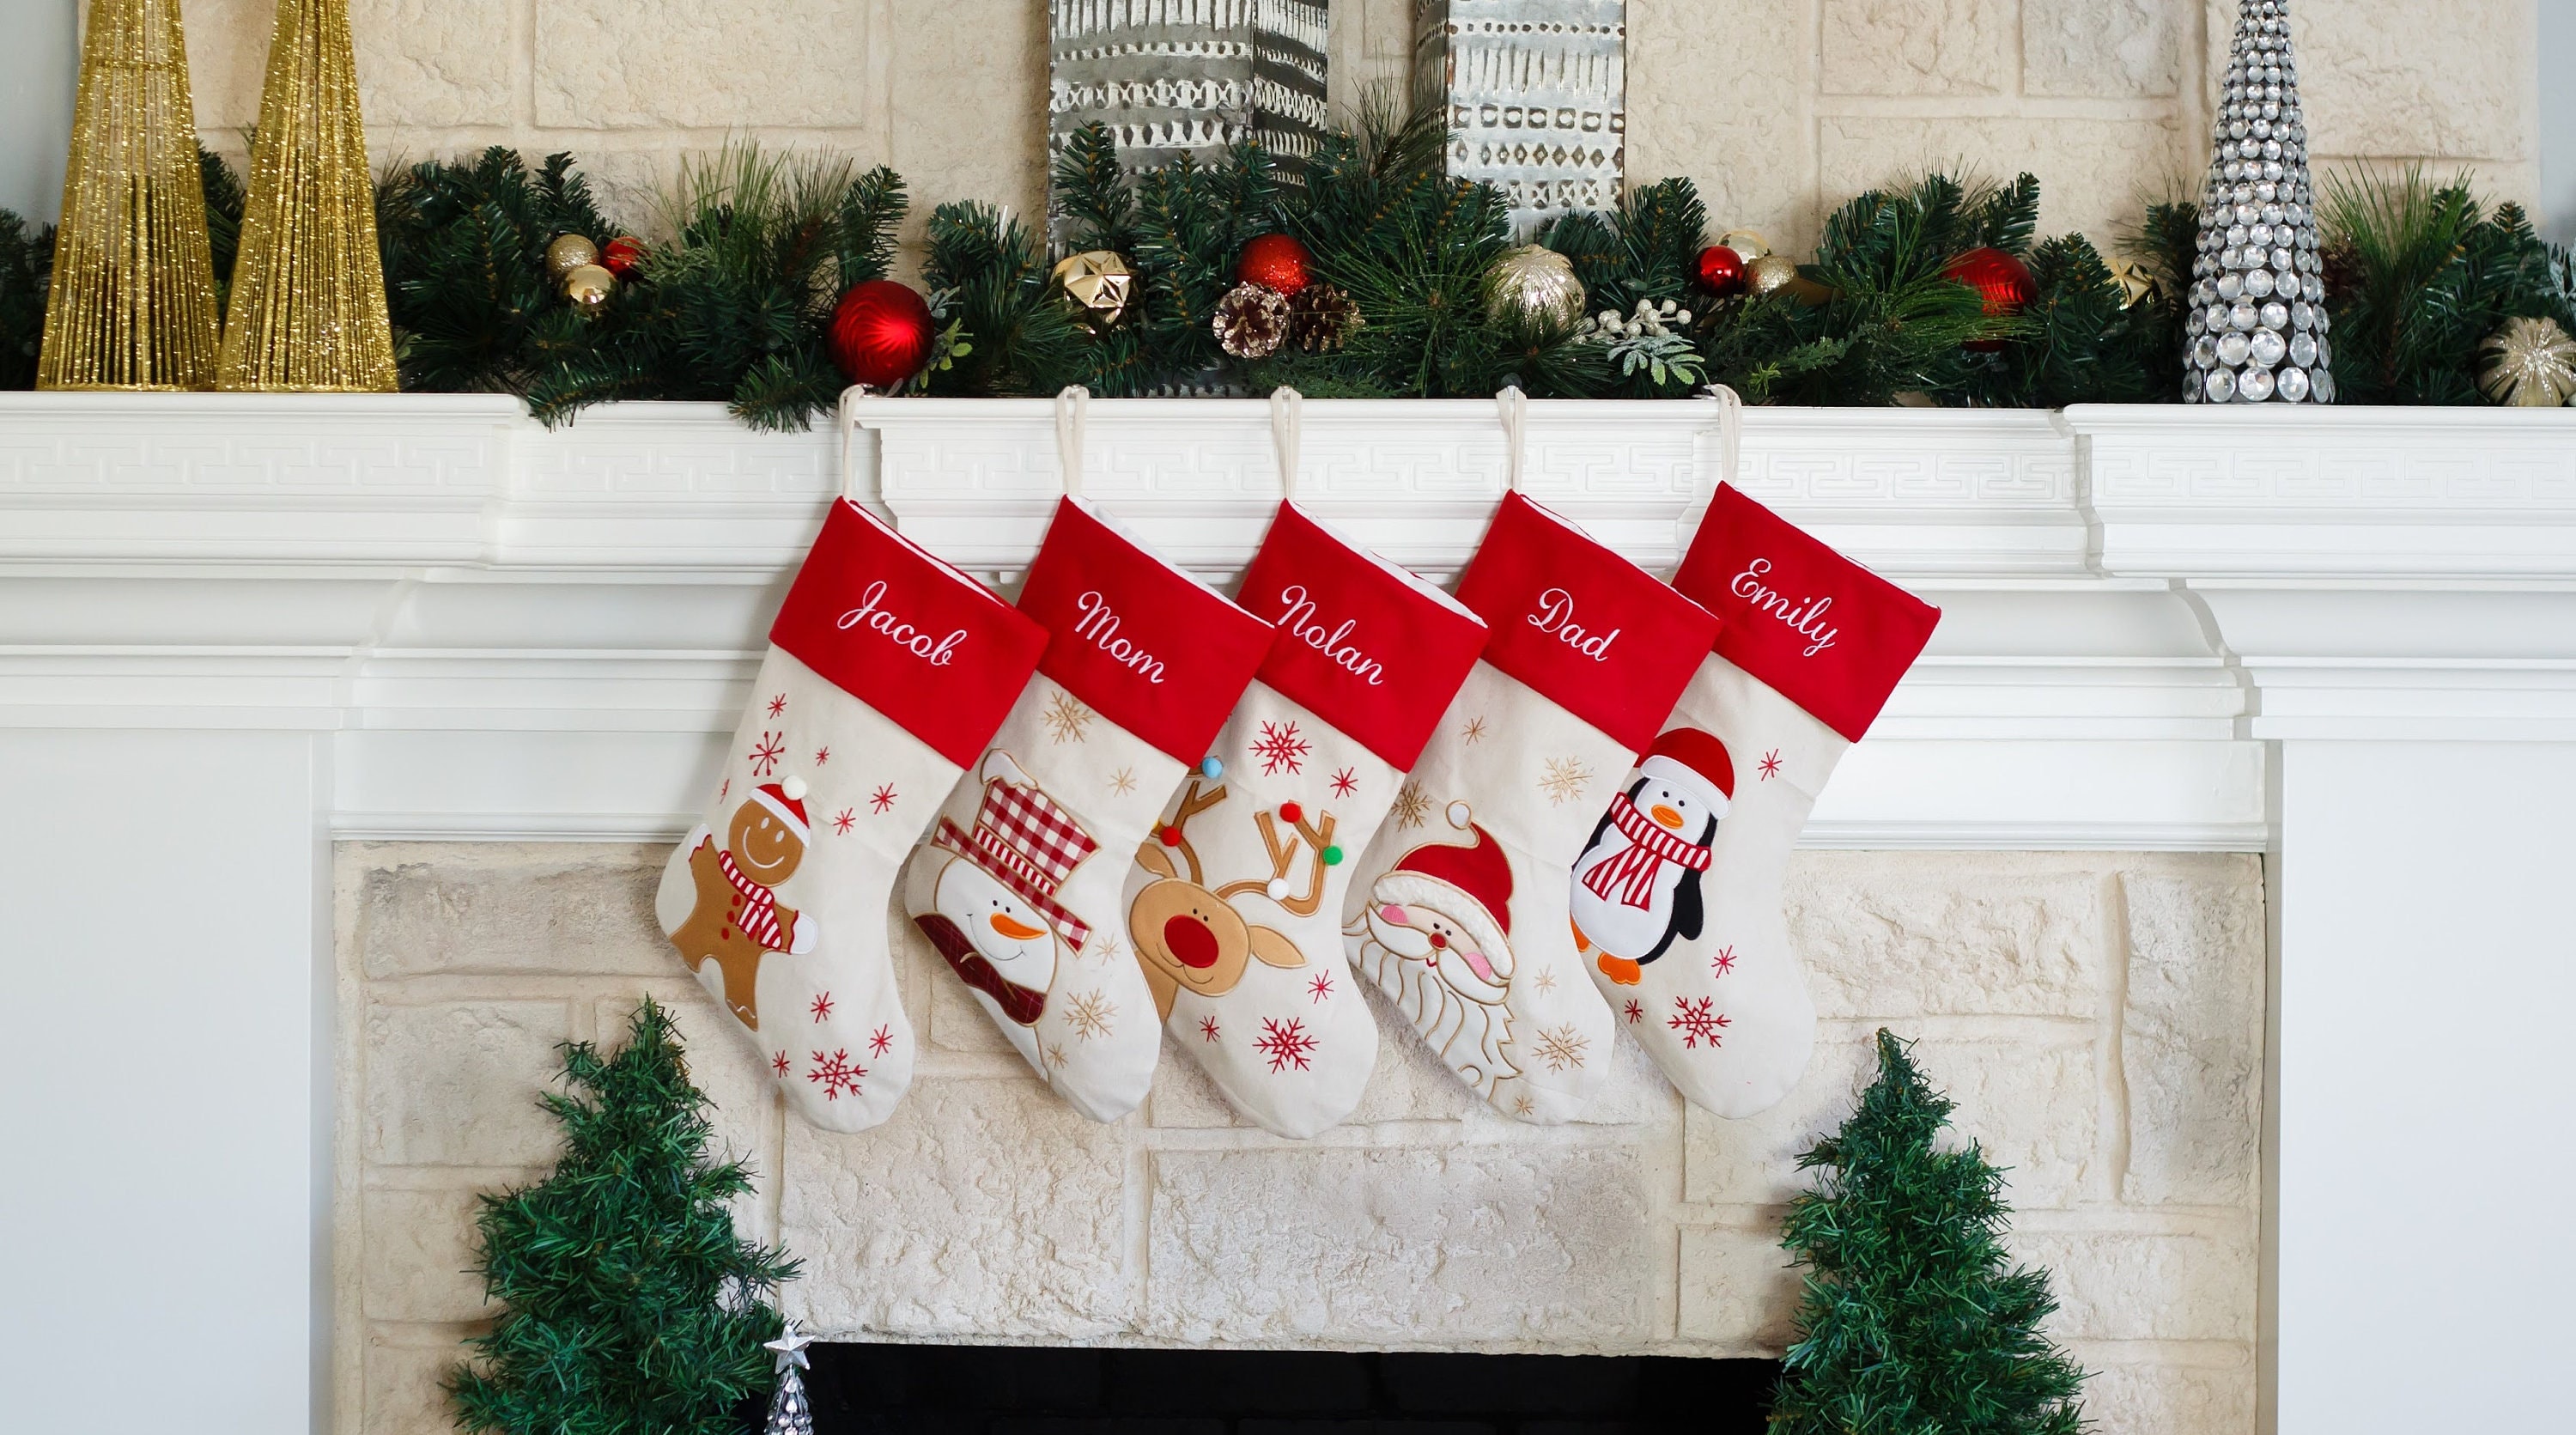 KC Republic DIY Christmas Stockings Color and Paint Your Own Personalized Stockings, Gift Wrap, Creative Gift for Kids, Family, Holiday - Santa Claus, Reindeer